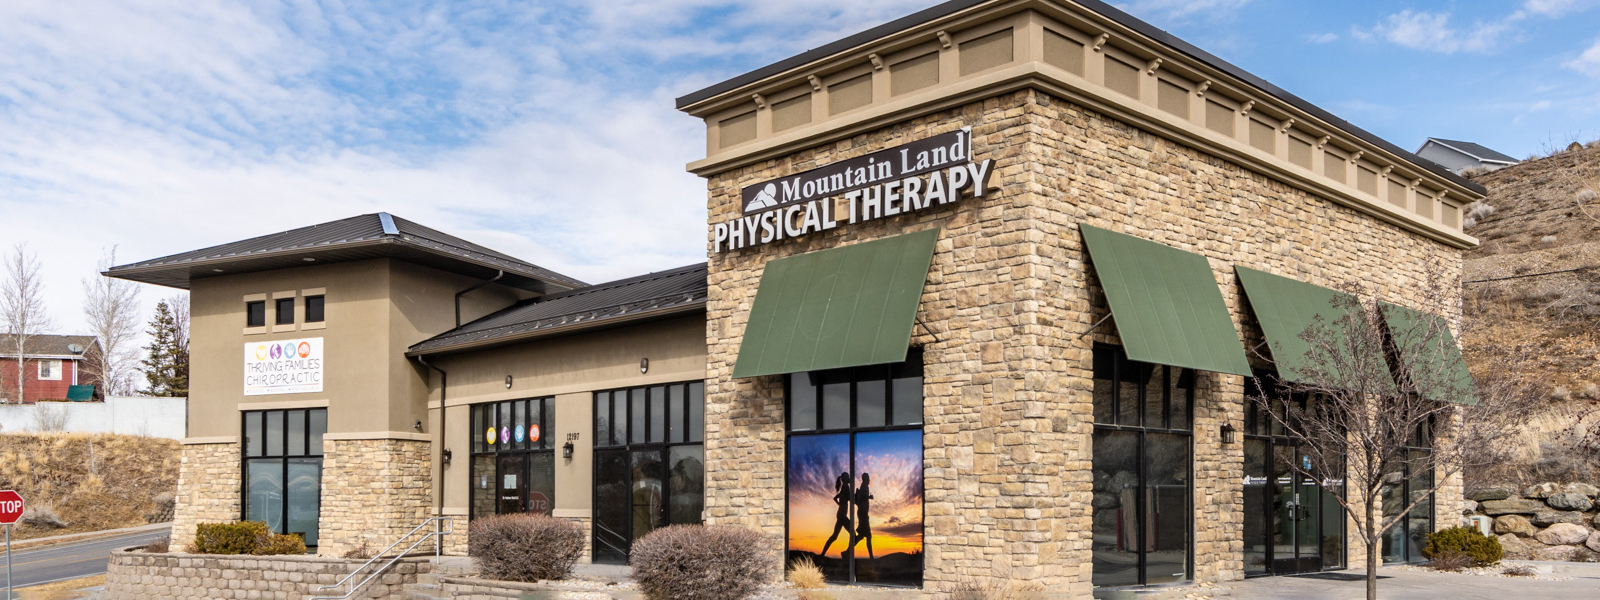 Mountain Land Physical Therapy Draper